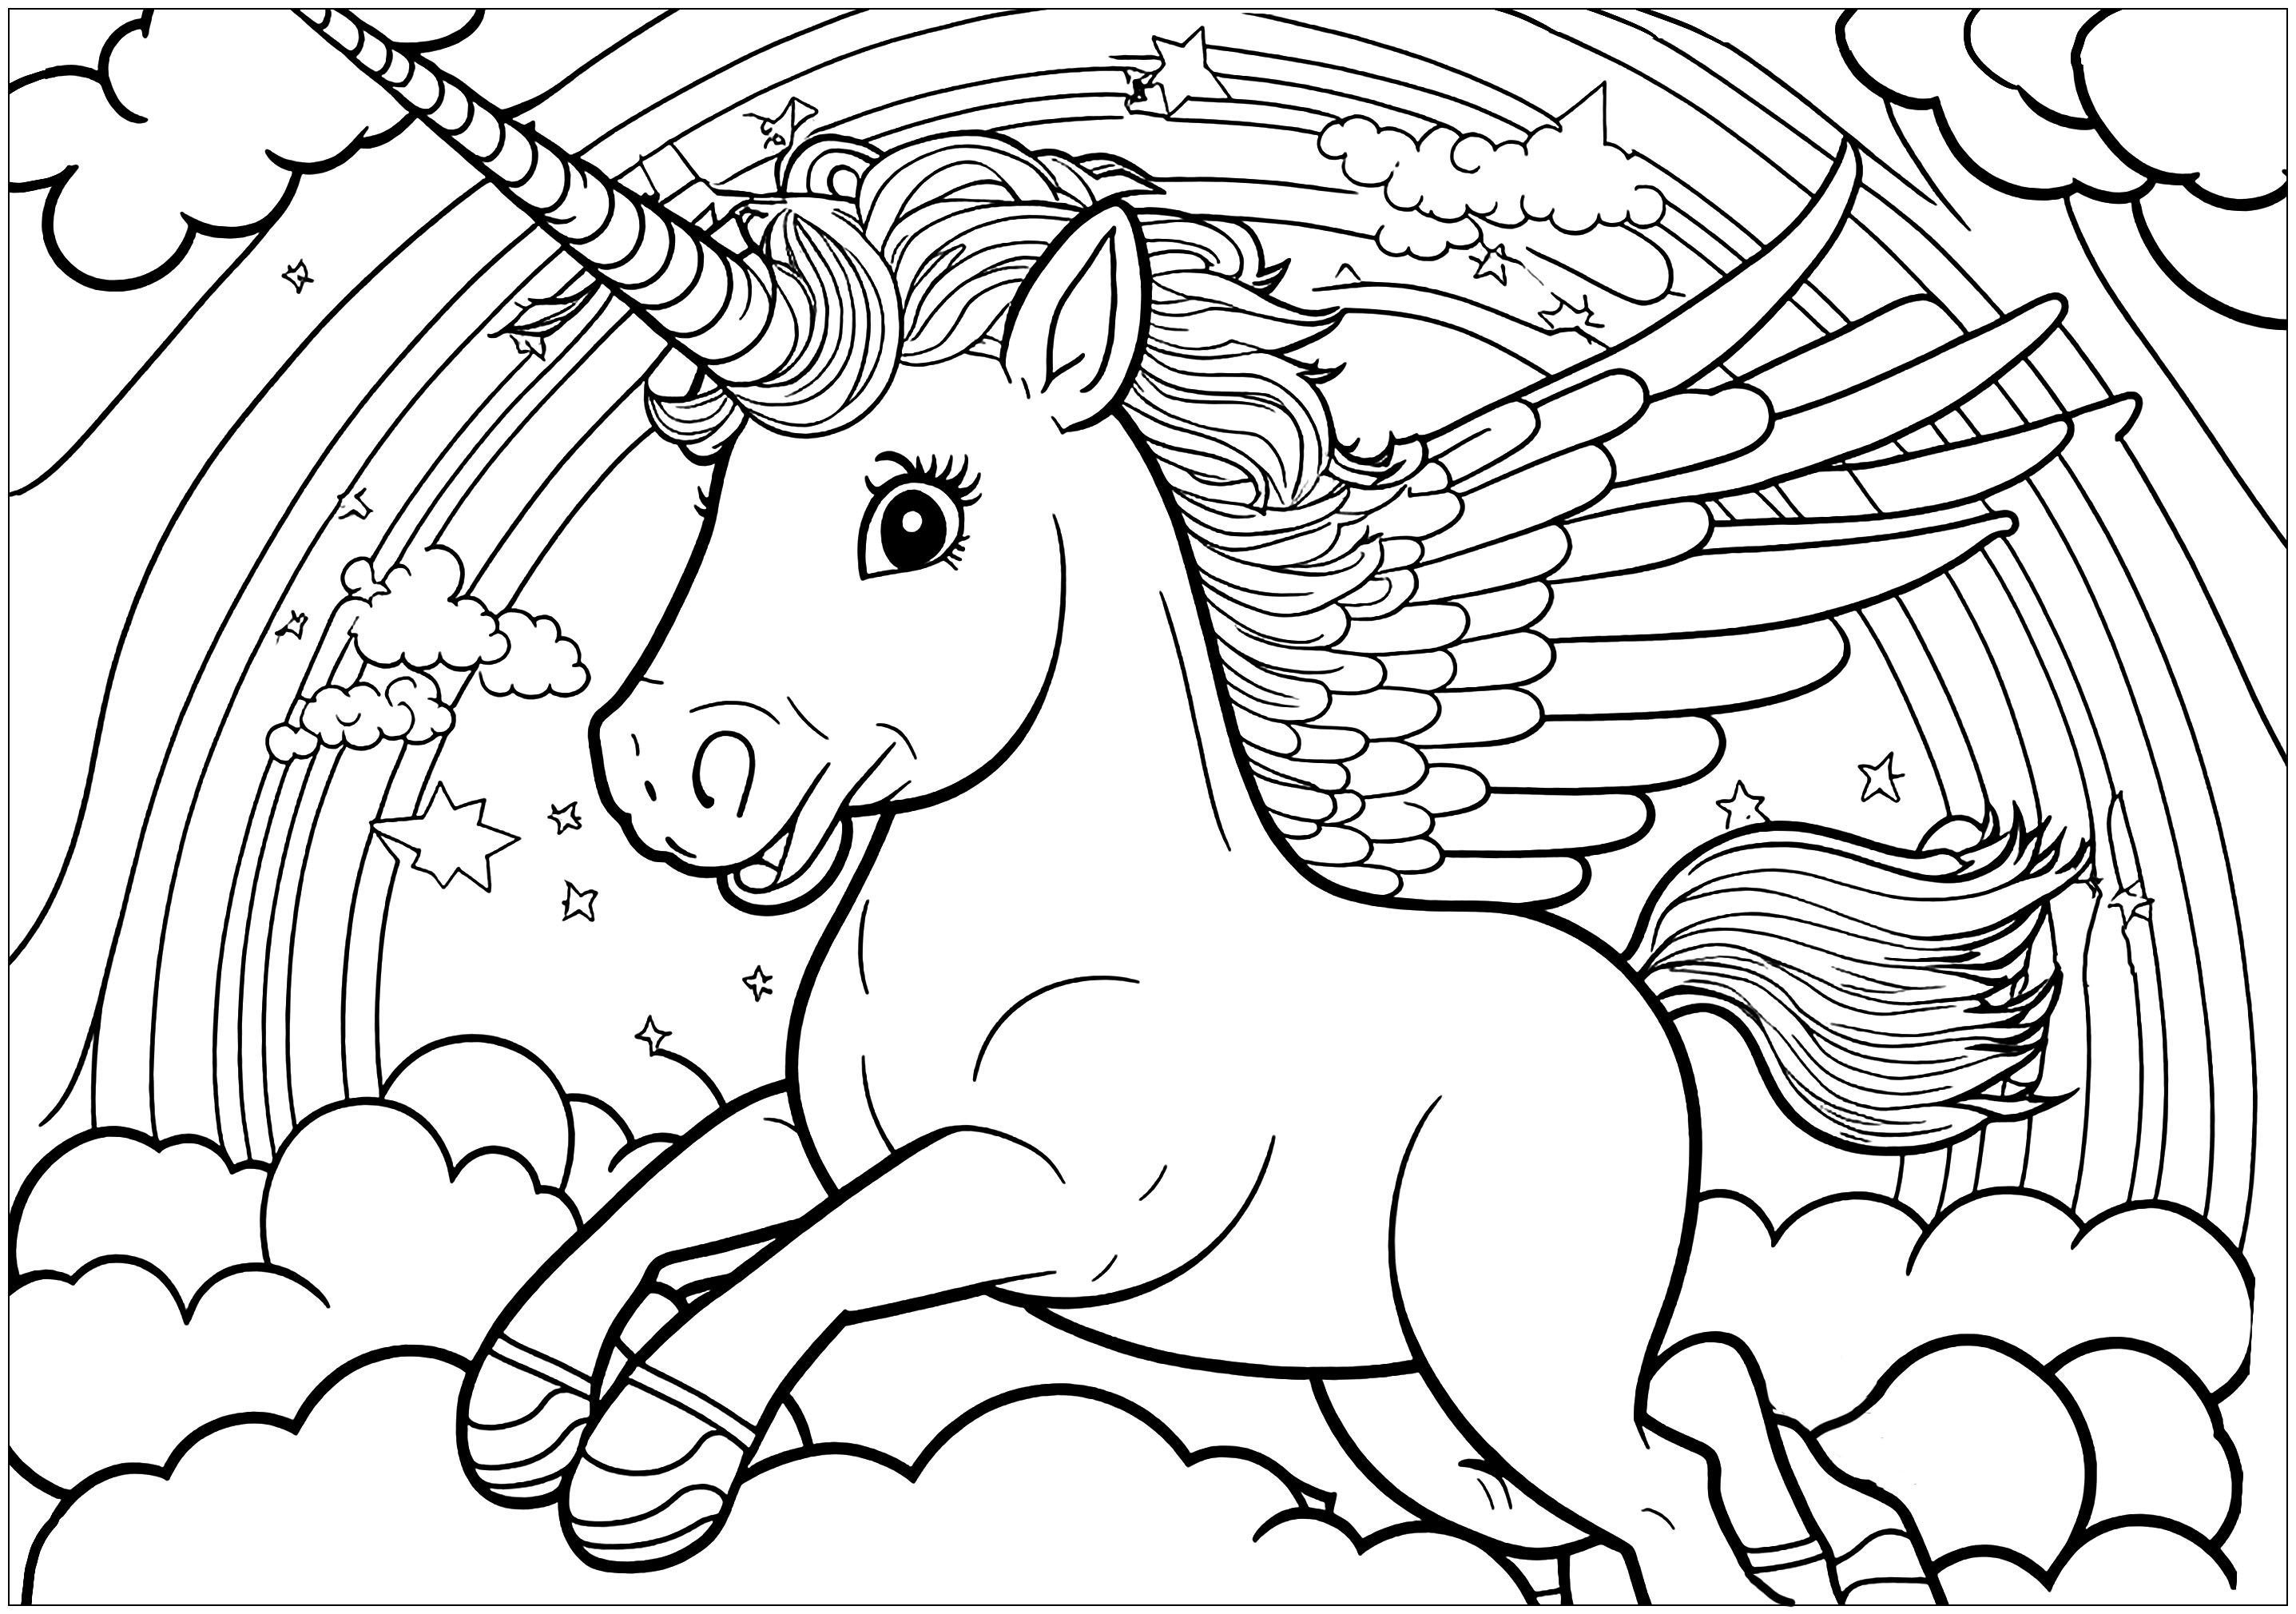 Unicorn in the sky with a rainbow - Unicorns Kids Coloring Pages